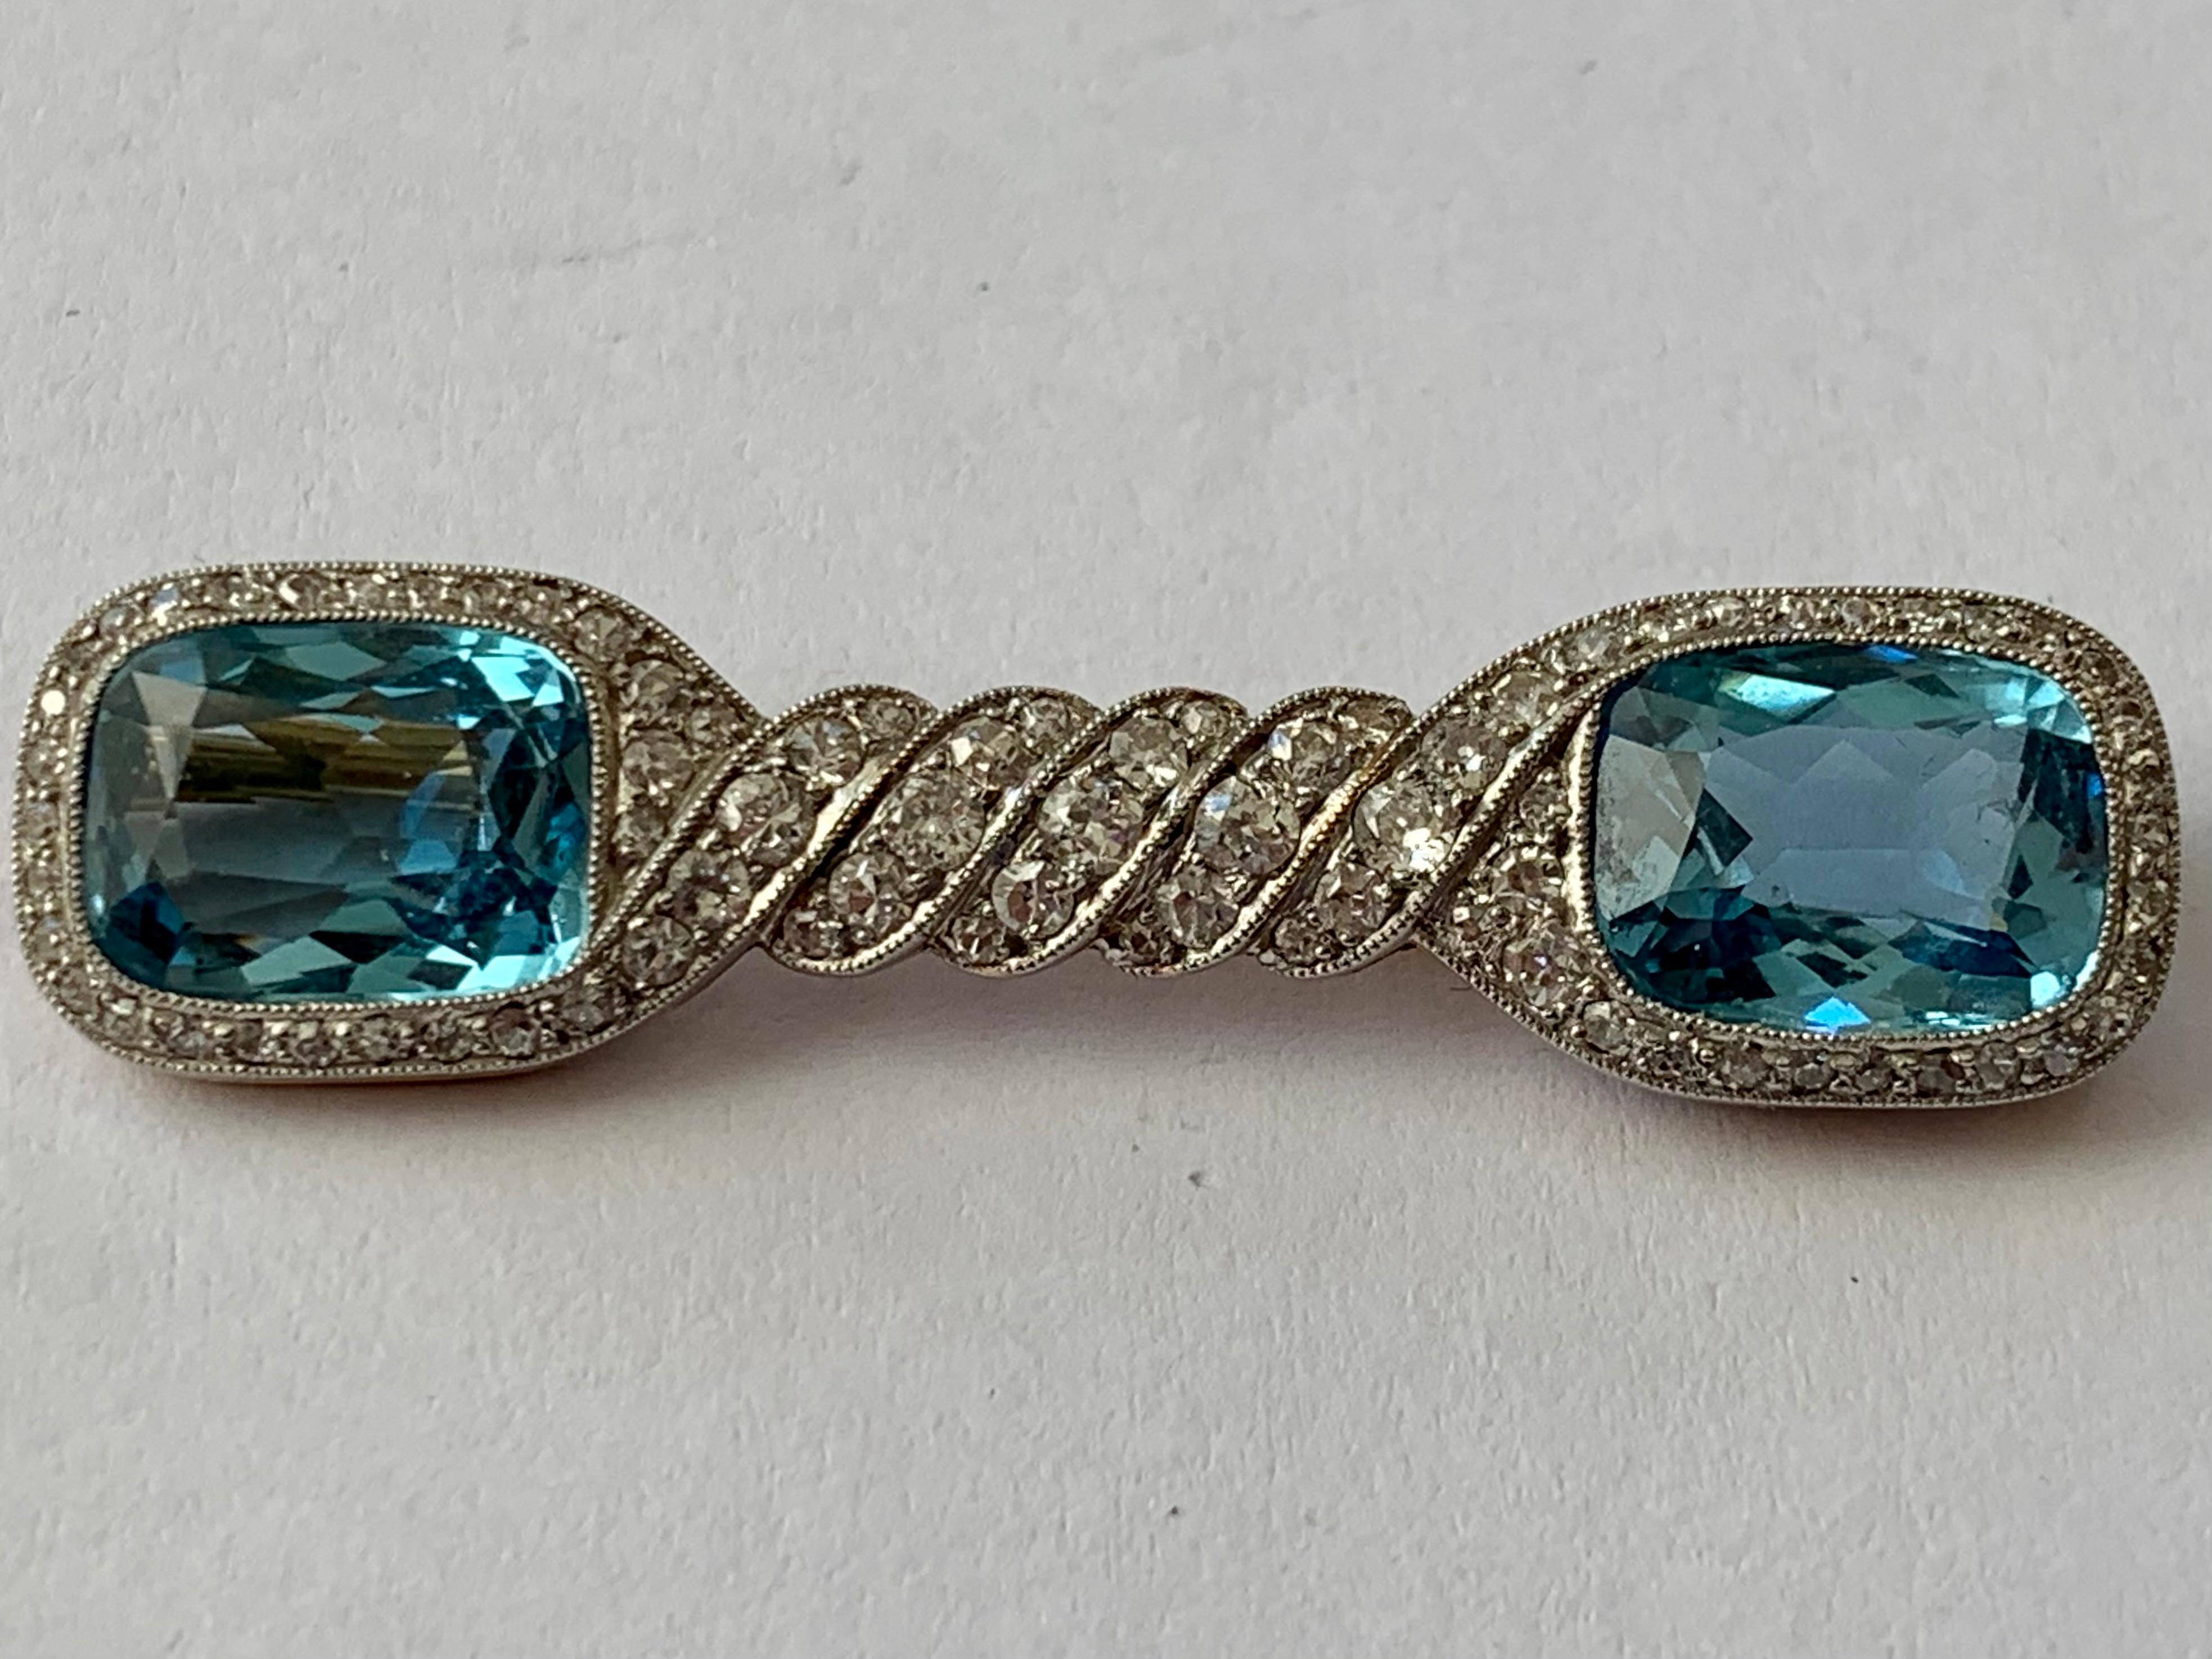 A stunning antique 1910 Aquamarine and Diamonds brooch mounted in Platinum over yellow Gold. Set with 2 beautiful Aquamarines weighing approximately 8 ct and approximately 1 ct of old European round cut Diamonds. 
An incredibly pretty piece of